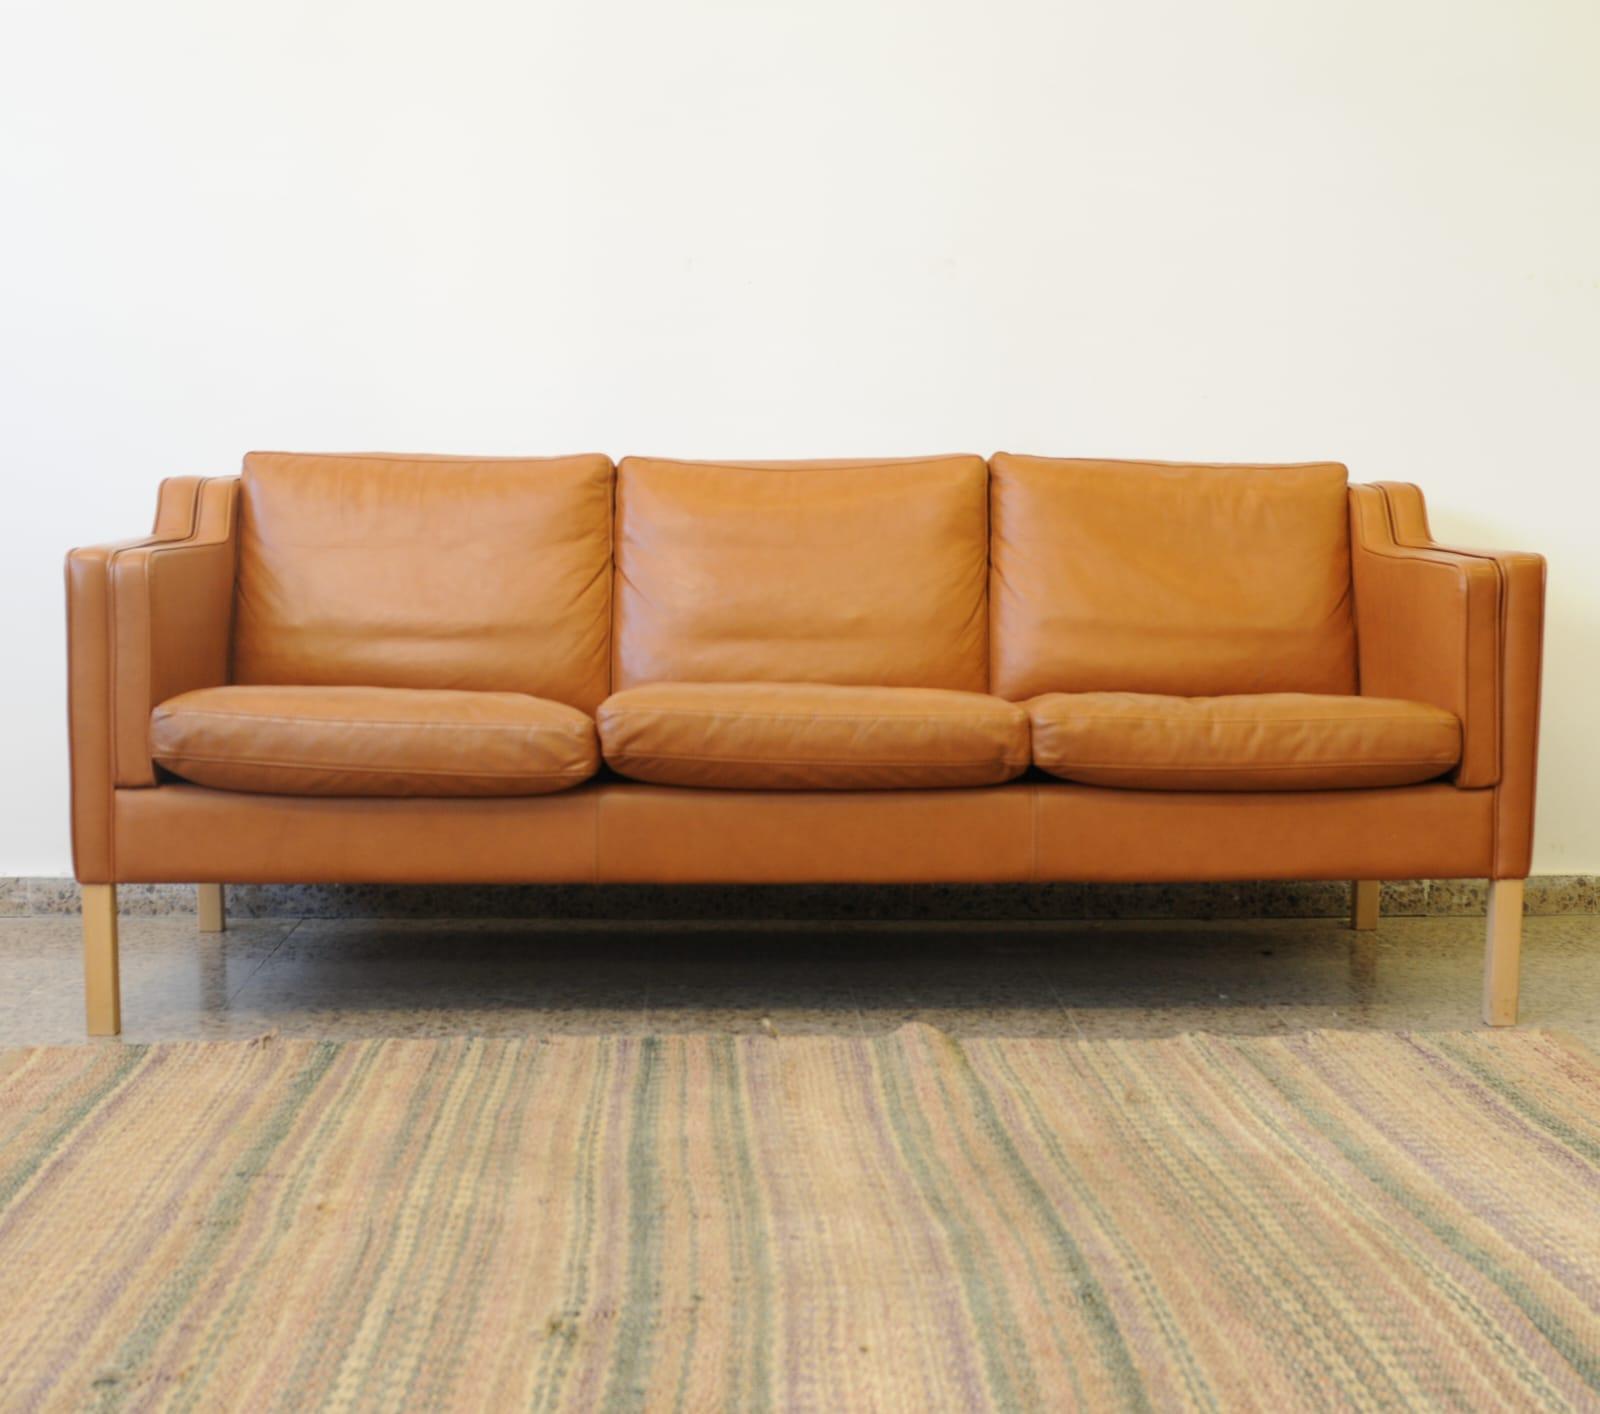 Vintage Three-seater EVA model cognac leather sofa, design by Stouby Polster Møbelfabrik from Denmark circa mid 1960s. 

The structure is in solid beech wood, joined by a strong leather support, with padded foam cushions in leather upholstery.